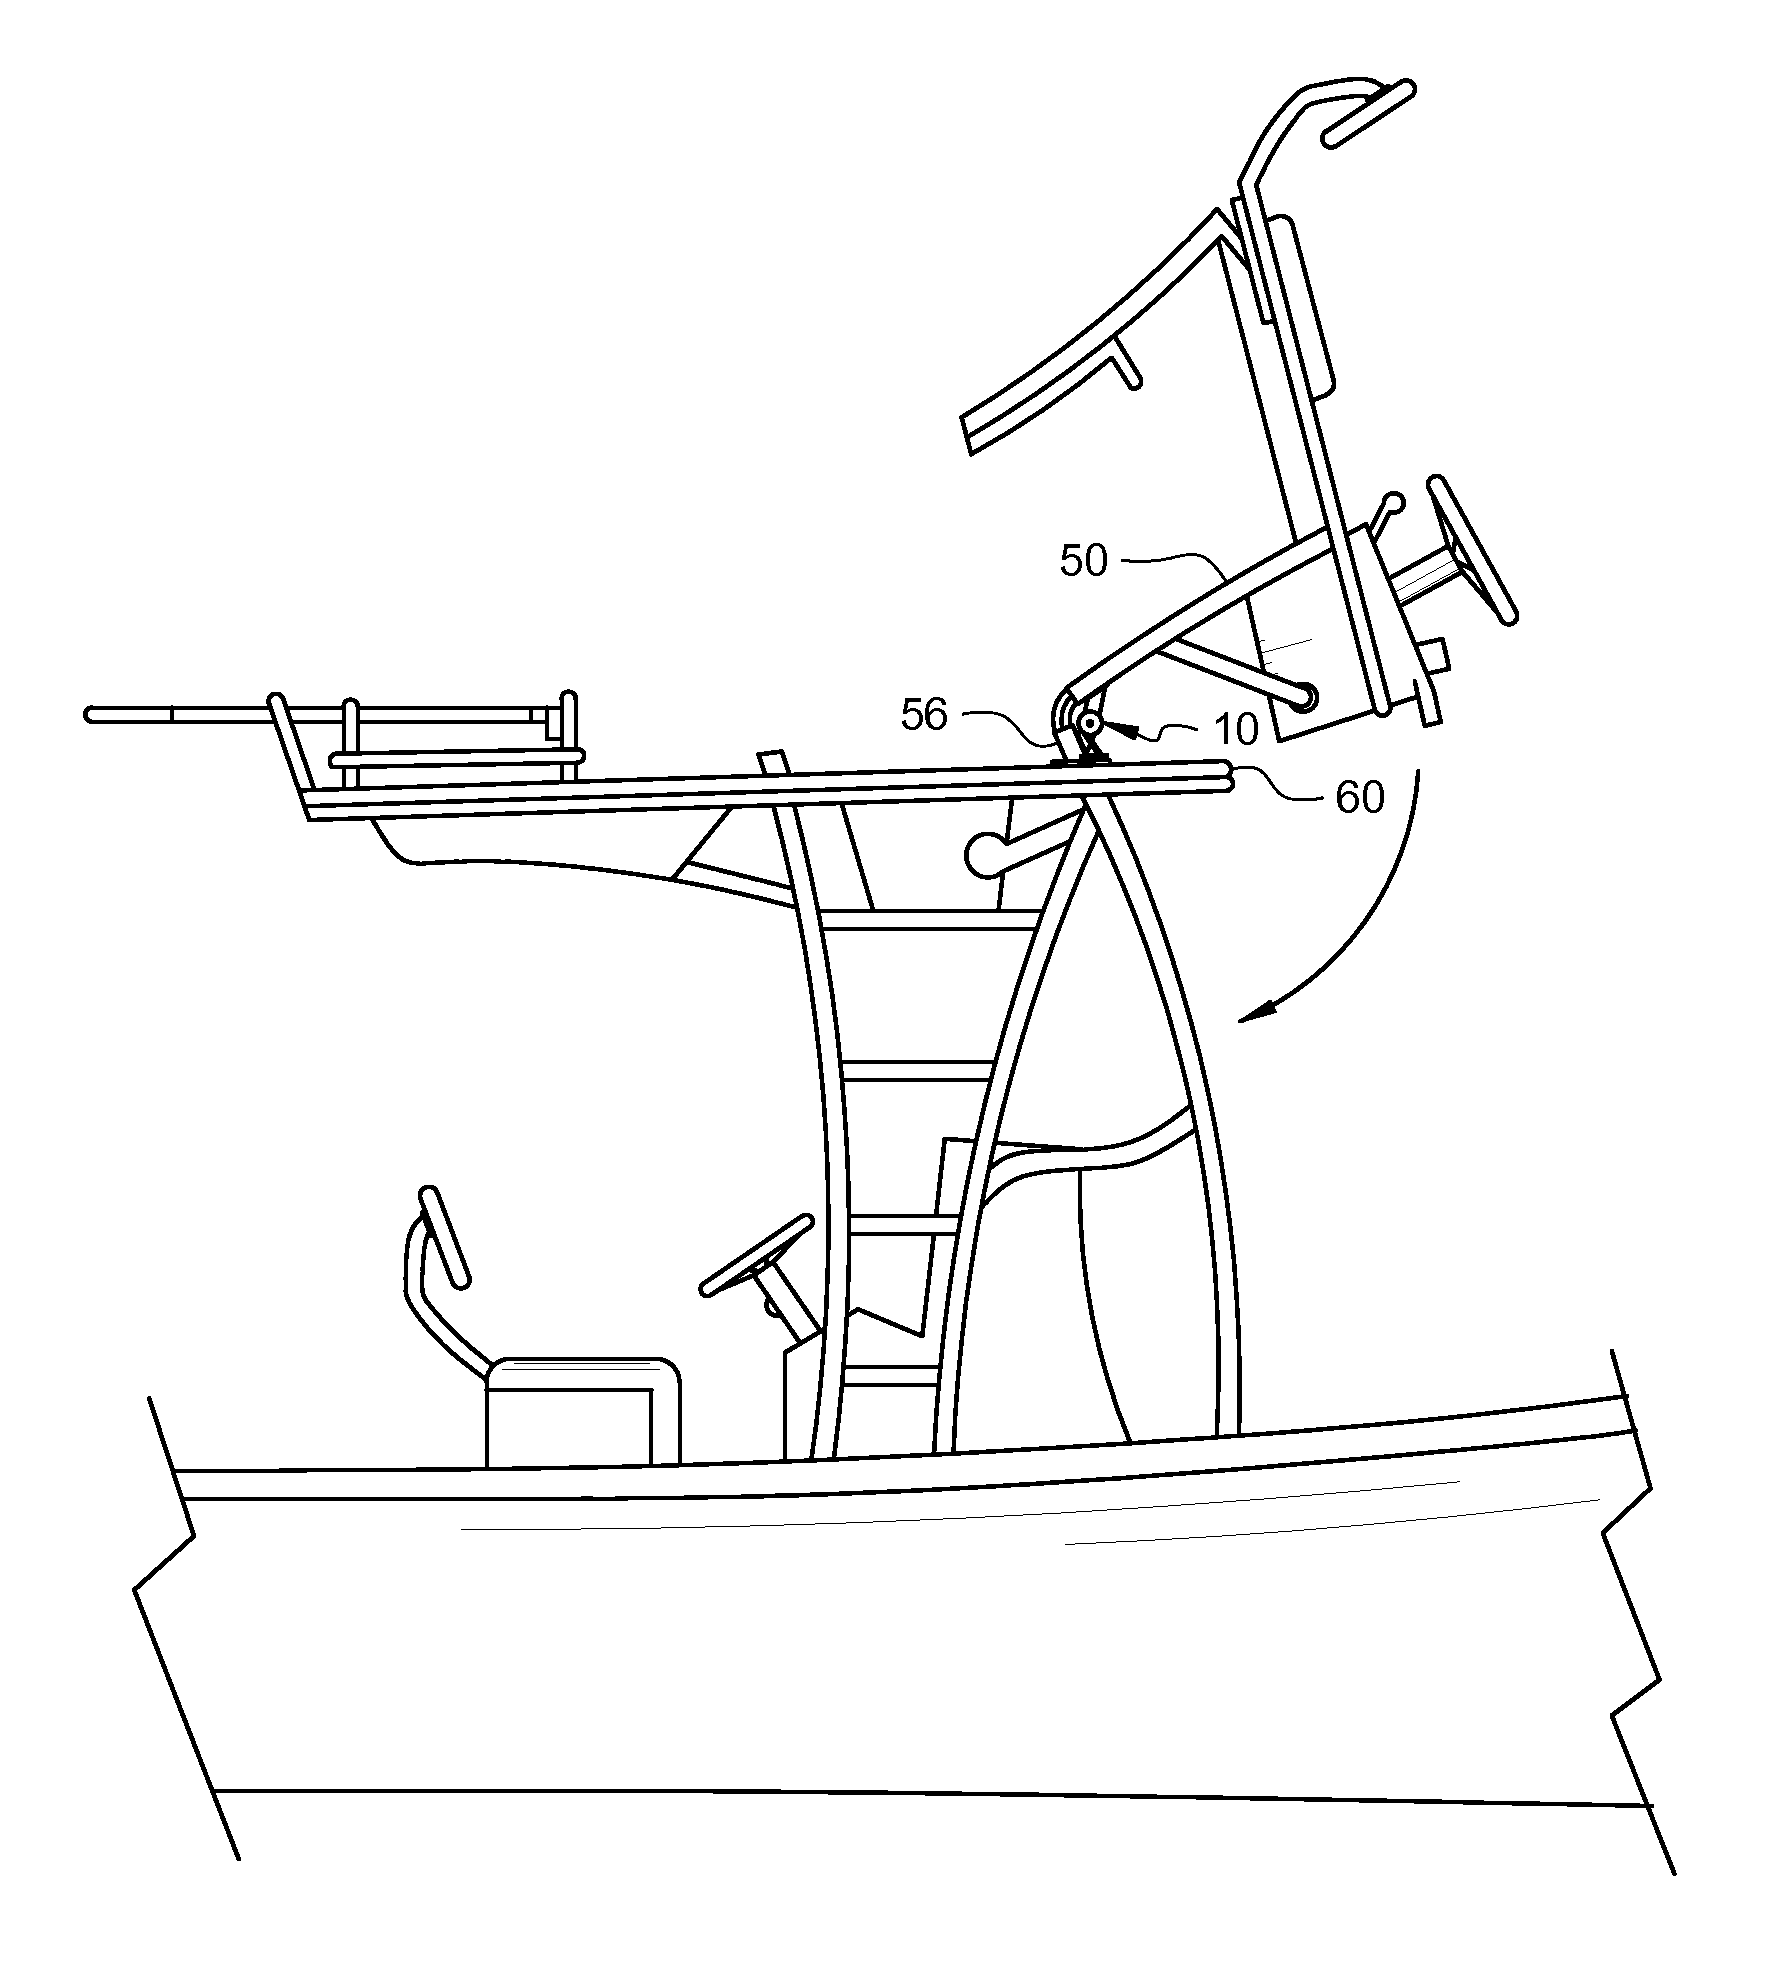 Load relief mechanism for fishing boat tower